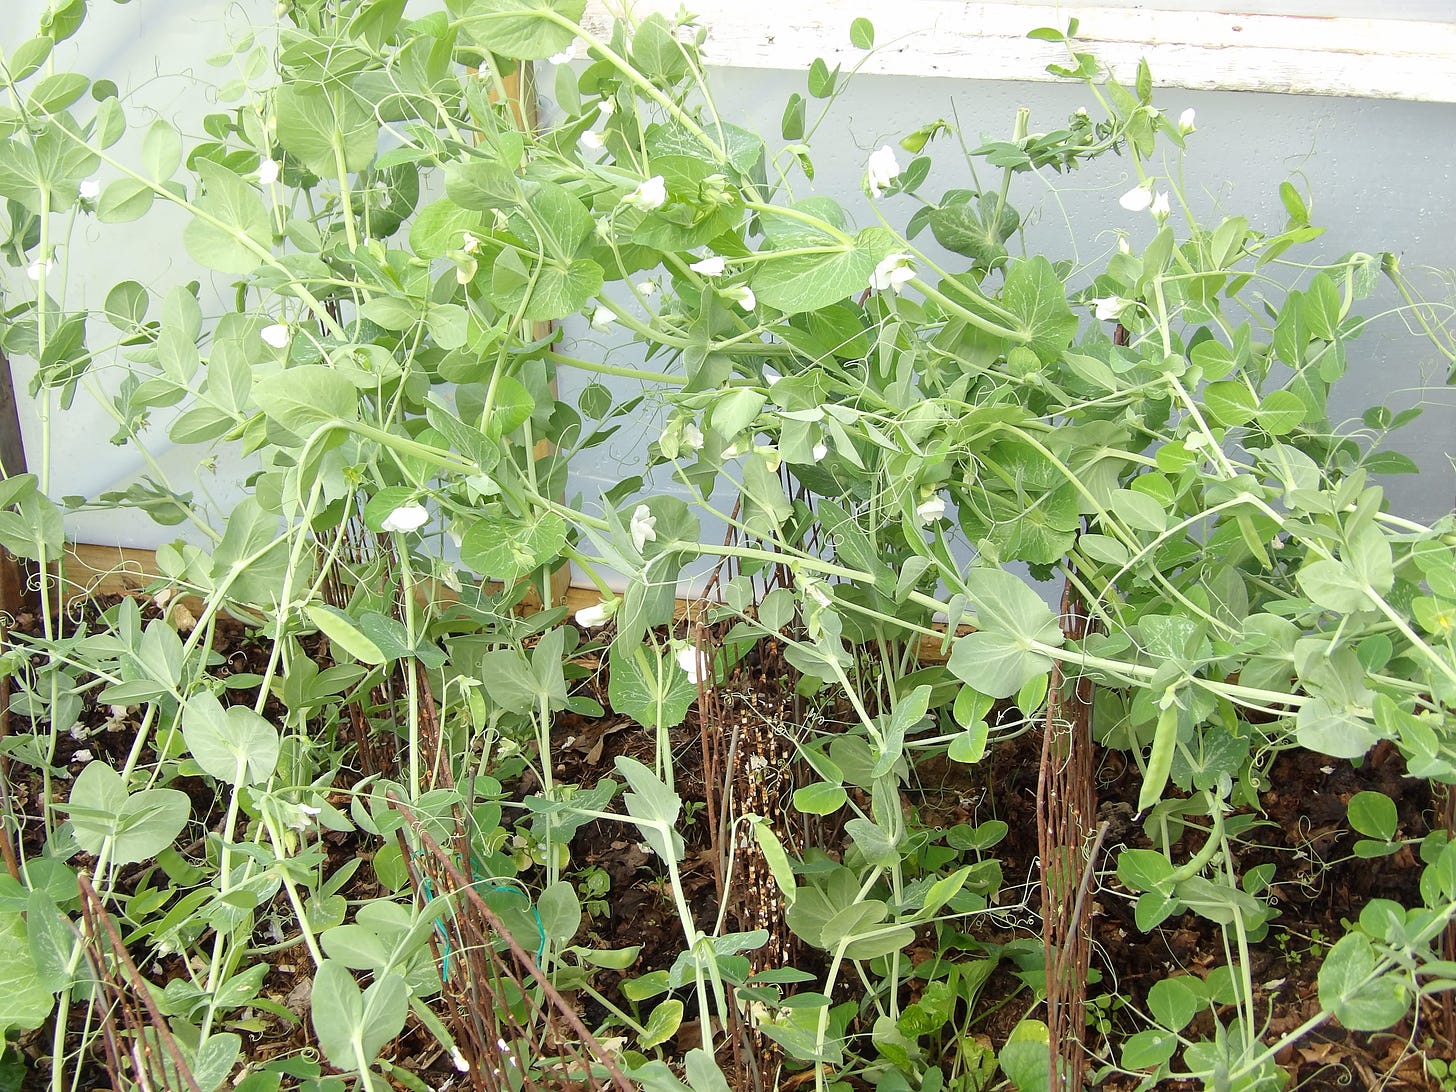 Snow Peas, Lettuce and Mescaline Mix